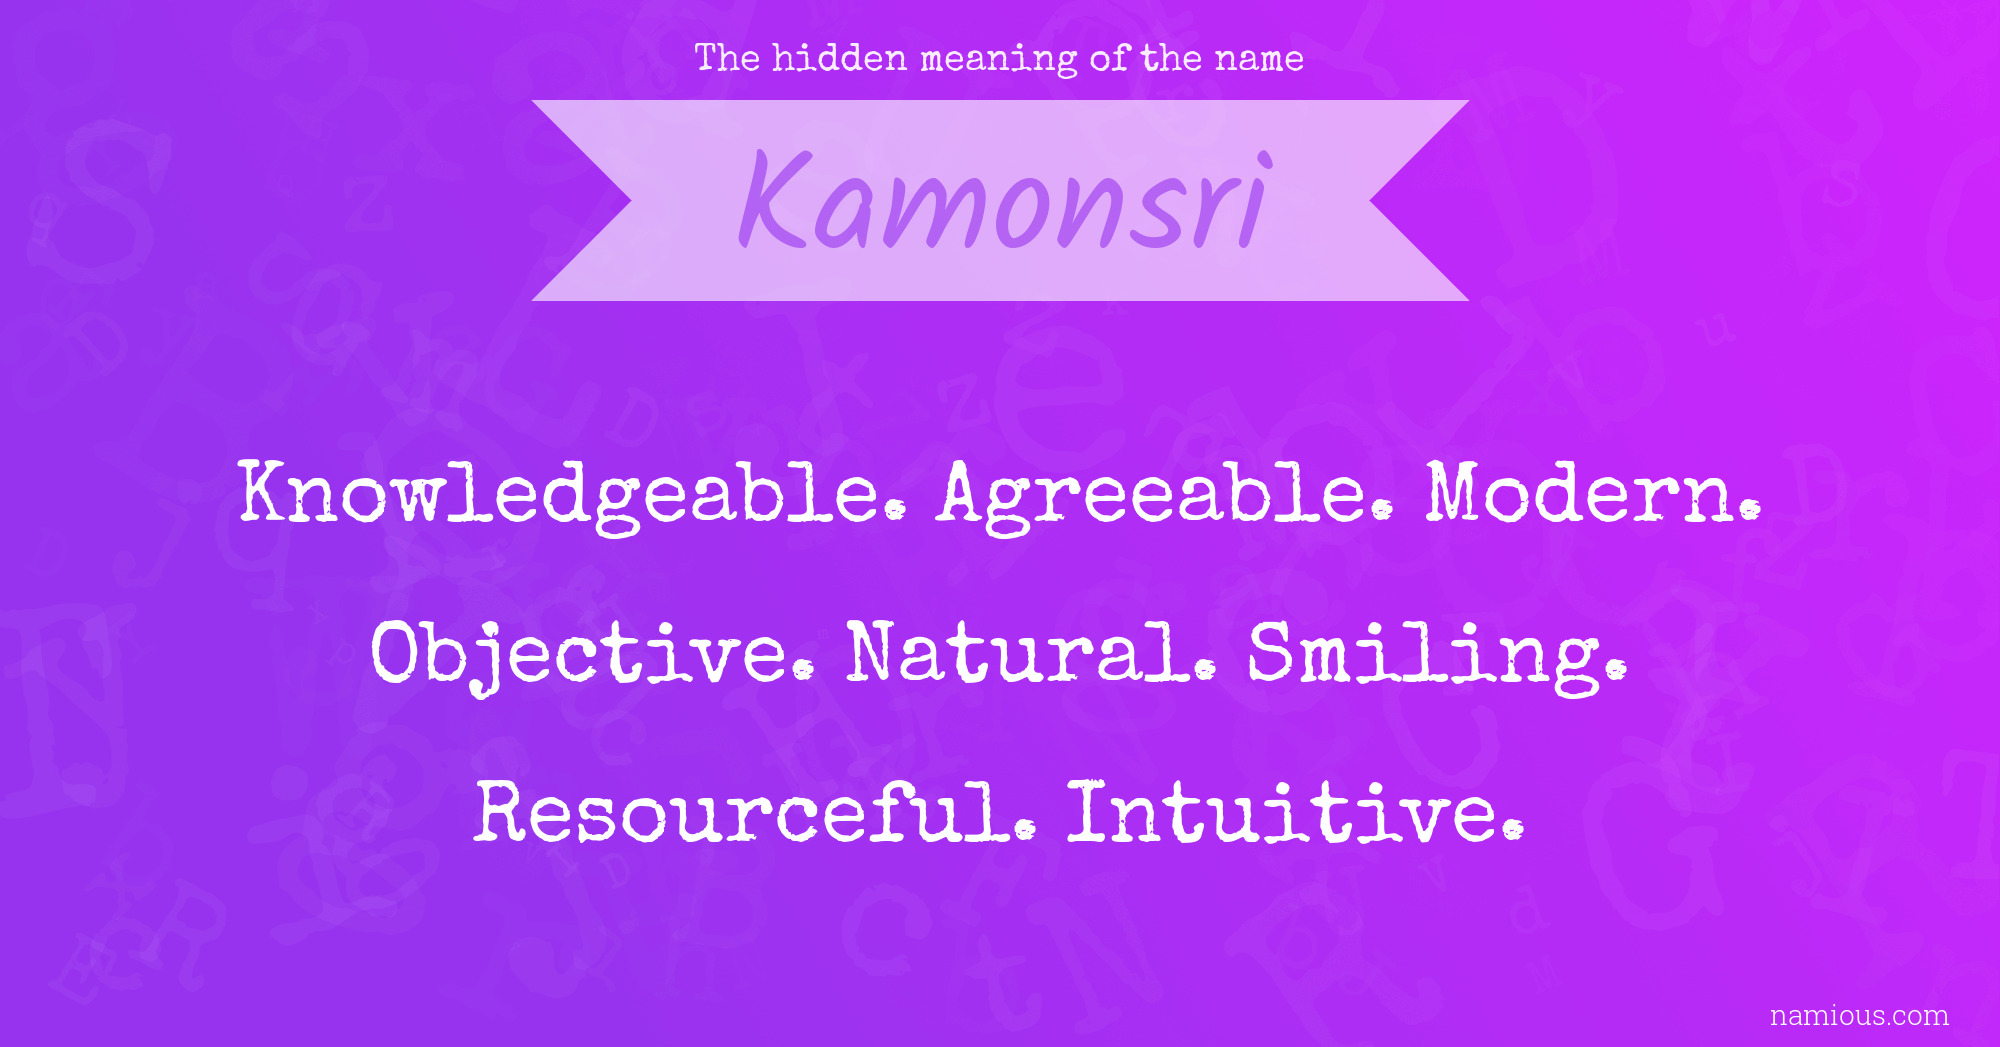 The hidden meaning of the name Kamonsri